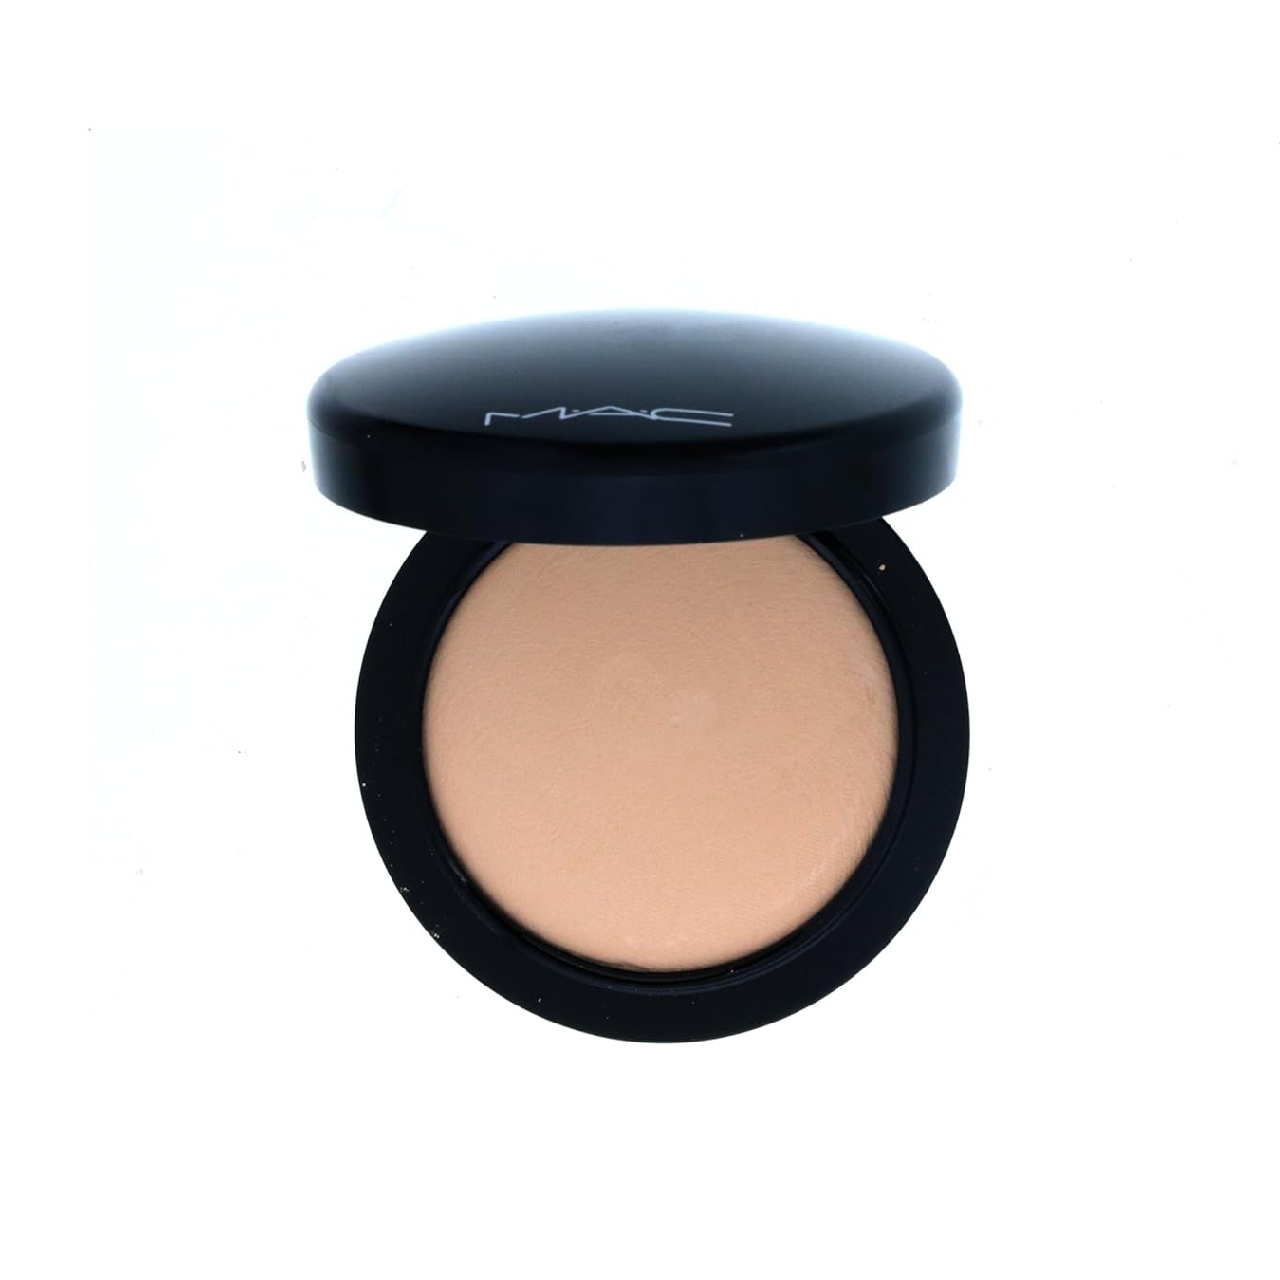 Open compact of MAC Mineralize Skinfinish highlighter on a white background, showcasing its baked, marbled texture.